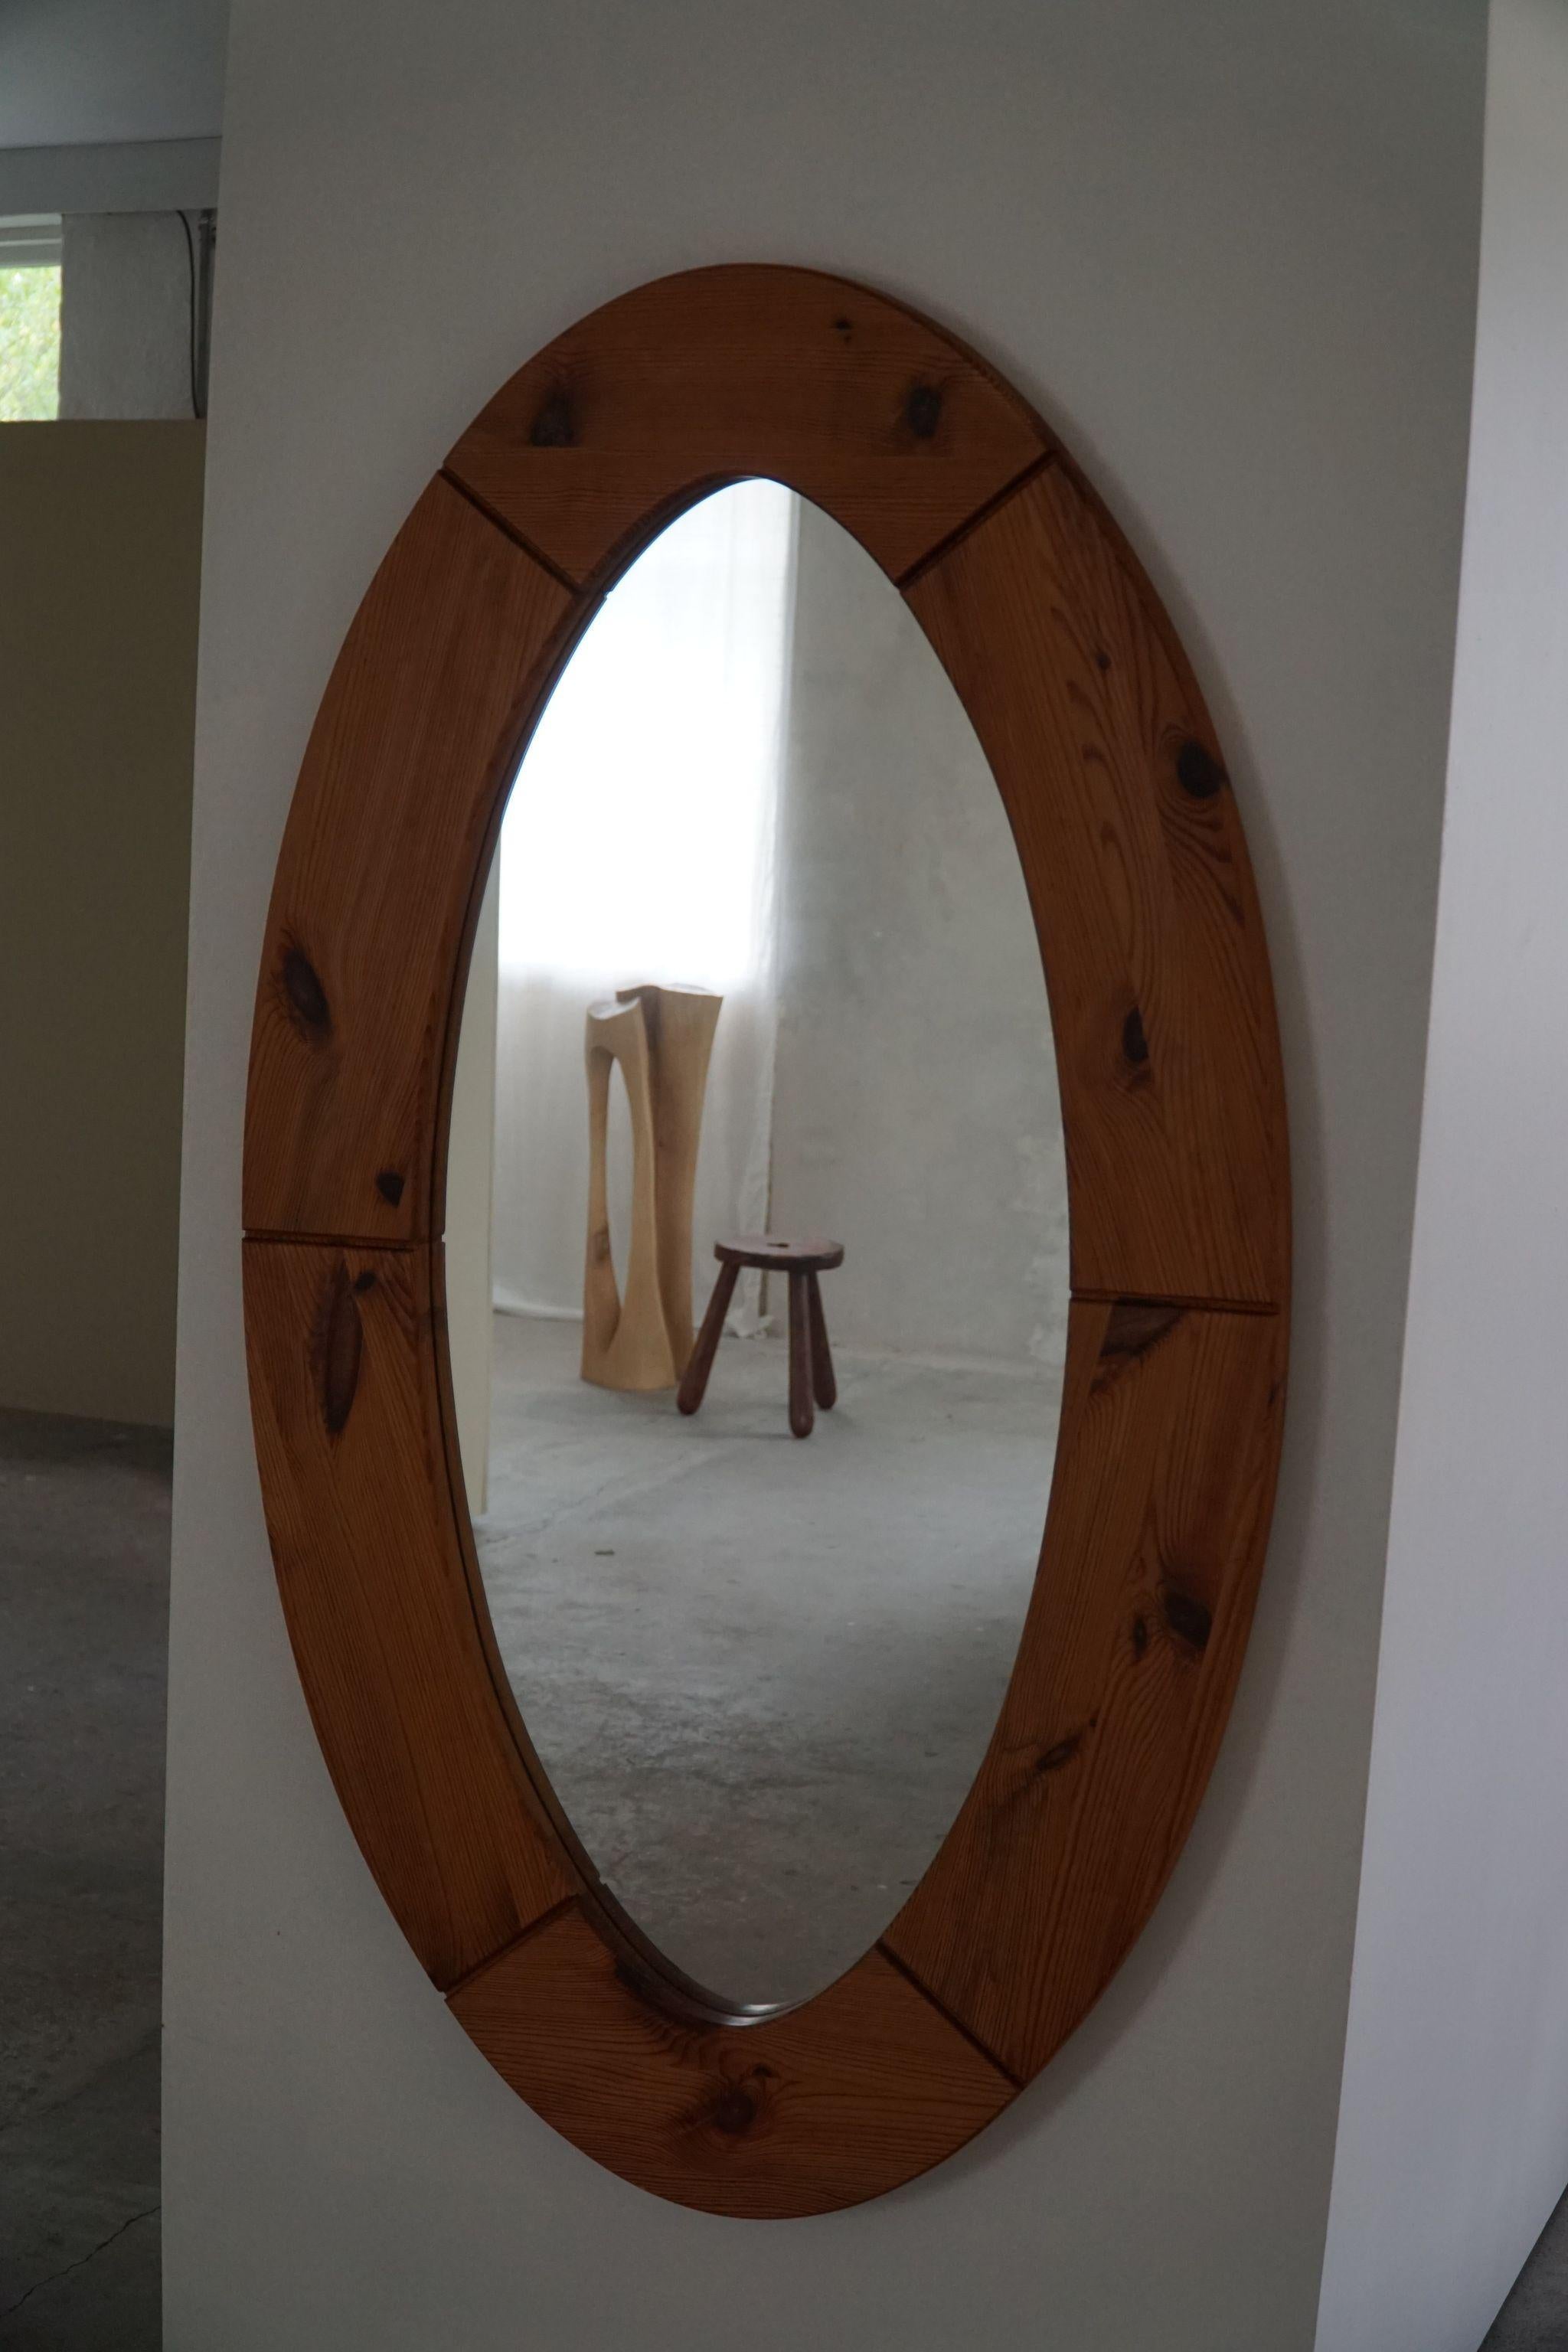 Brutalist Large Oval Wall Mirror in Solid Pine by Glasmäster Markaryd, Sweden, 1960s For Sale